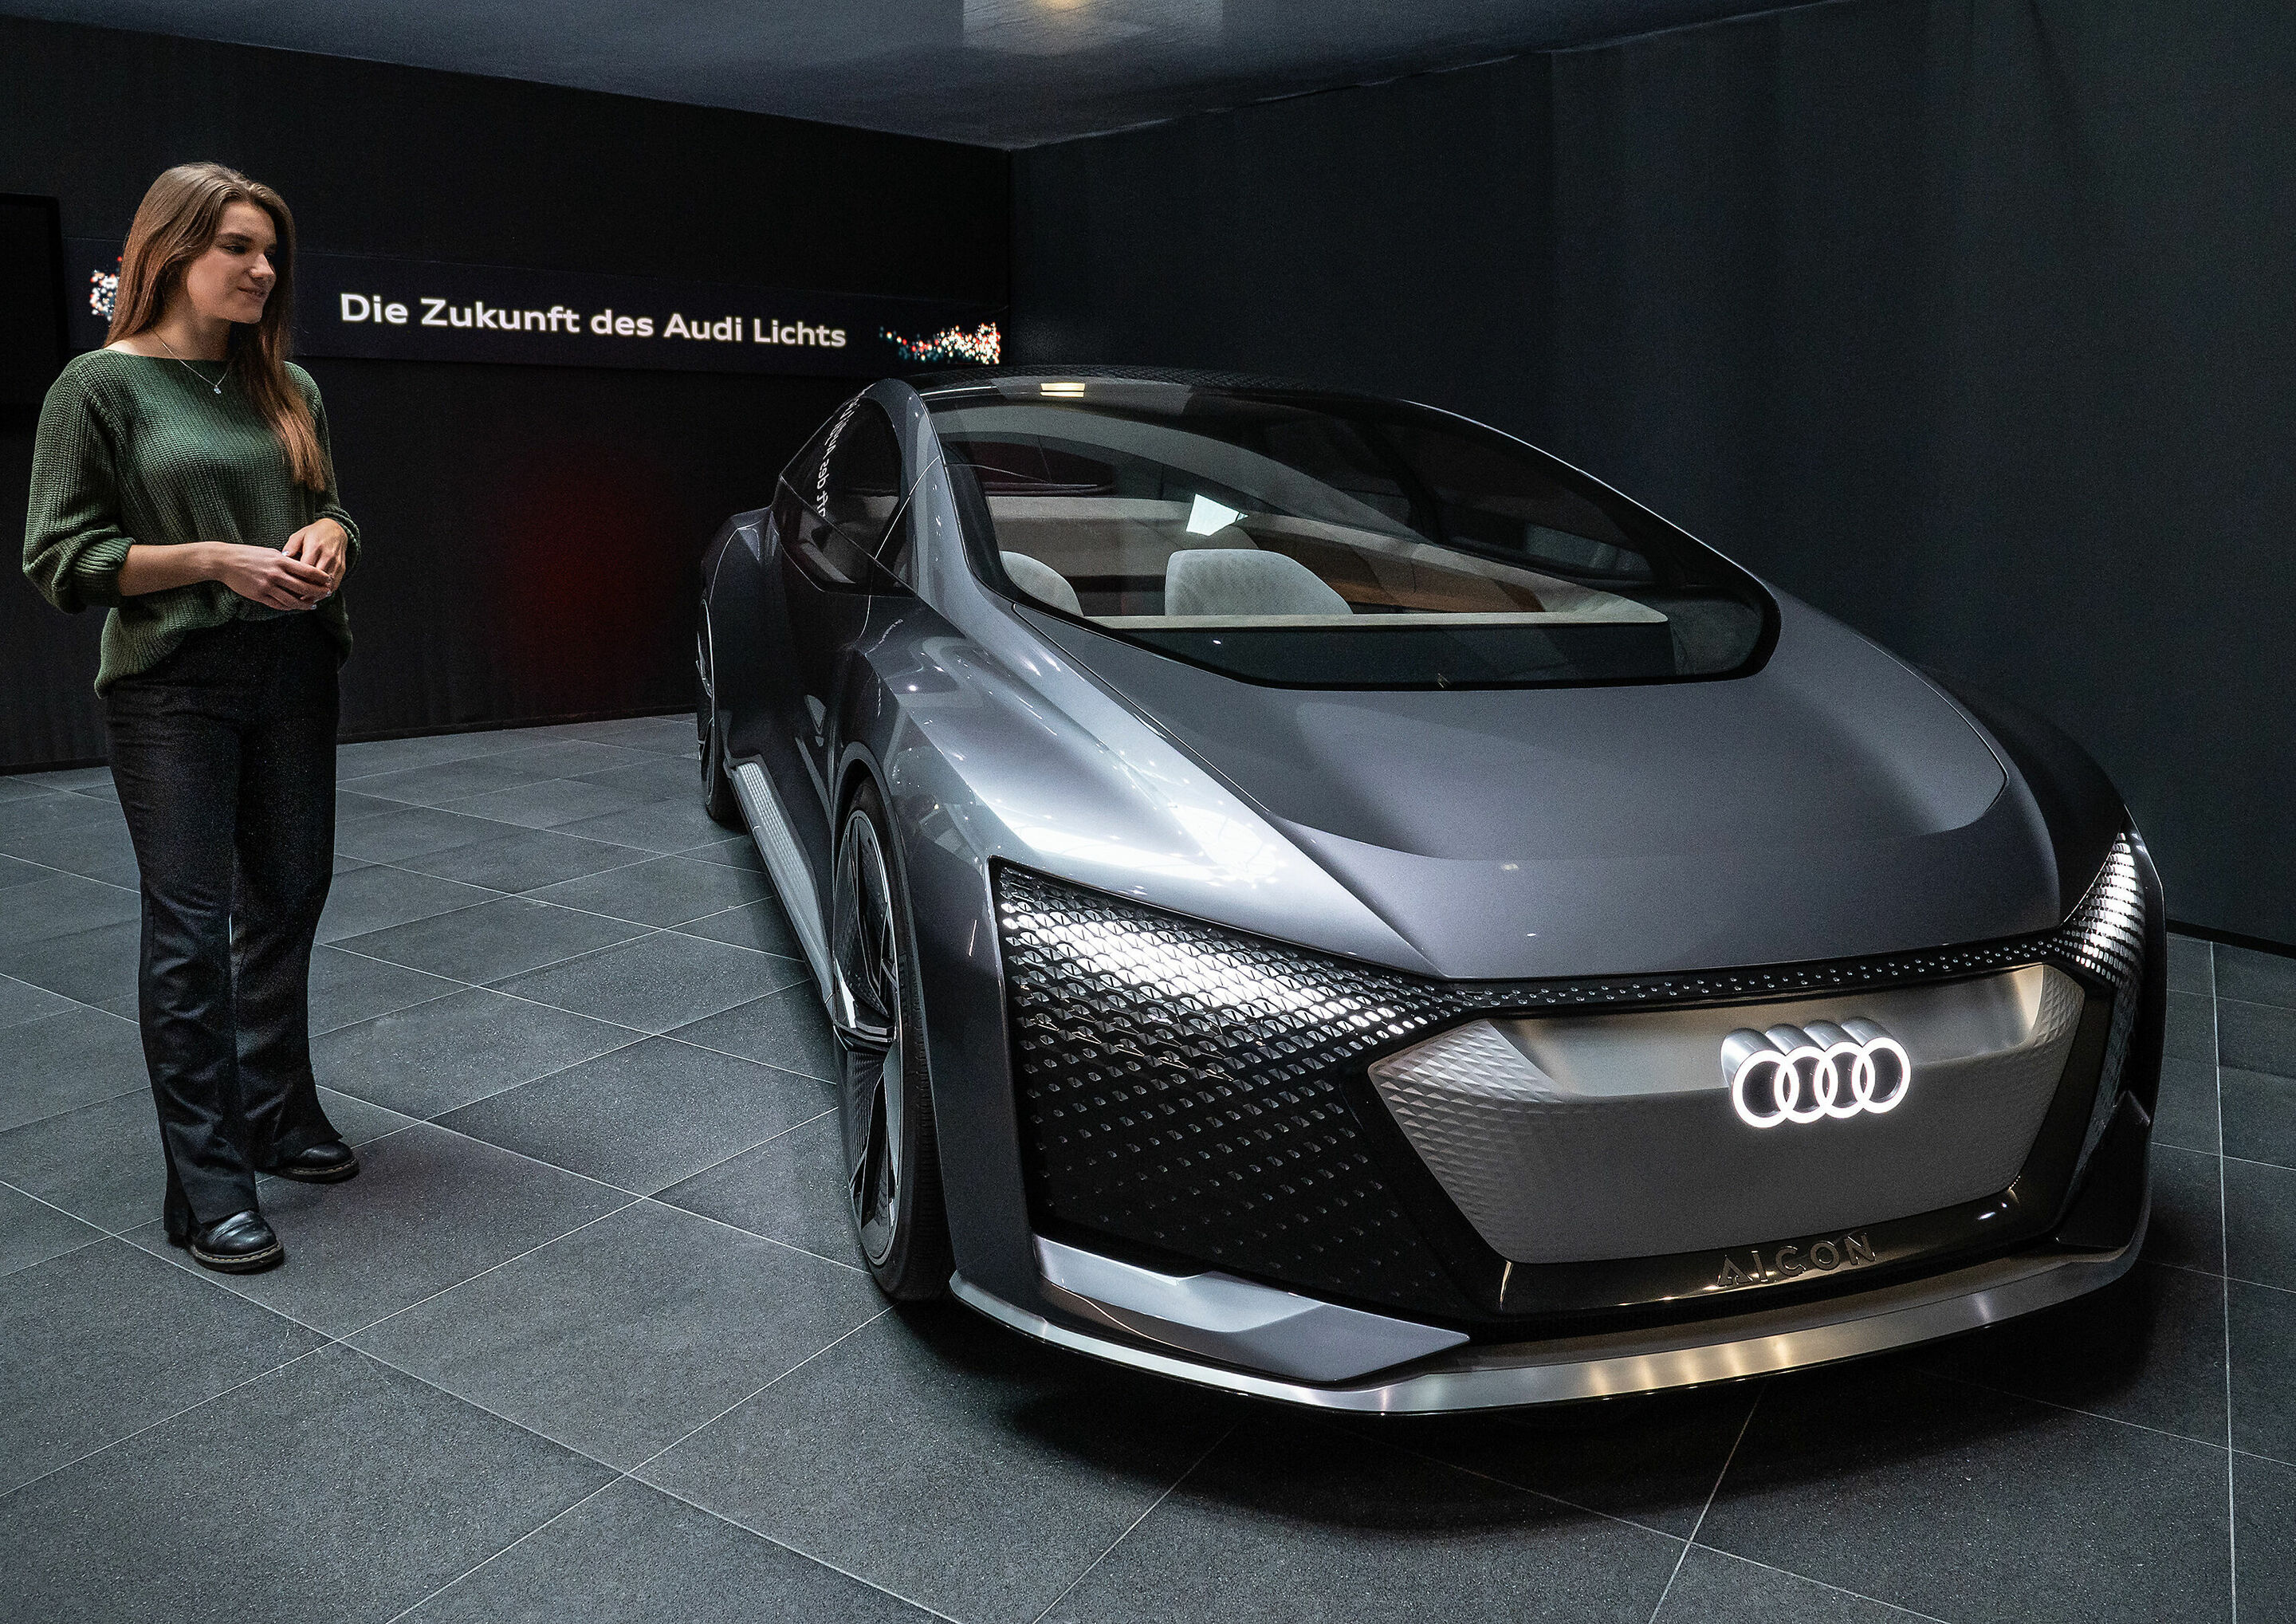 Passionate about light: Insights from two experts at the Audi